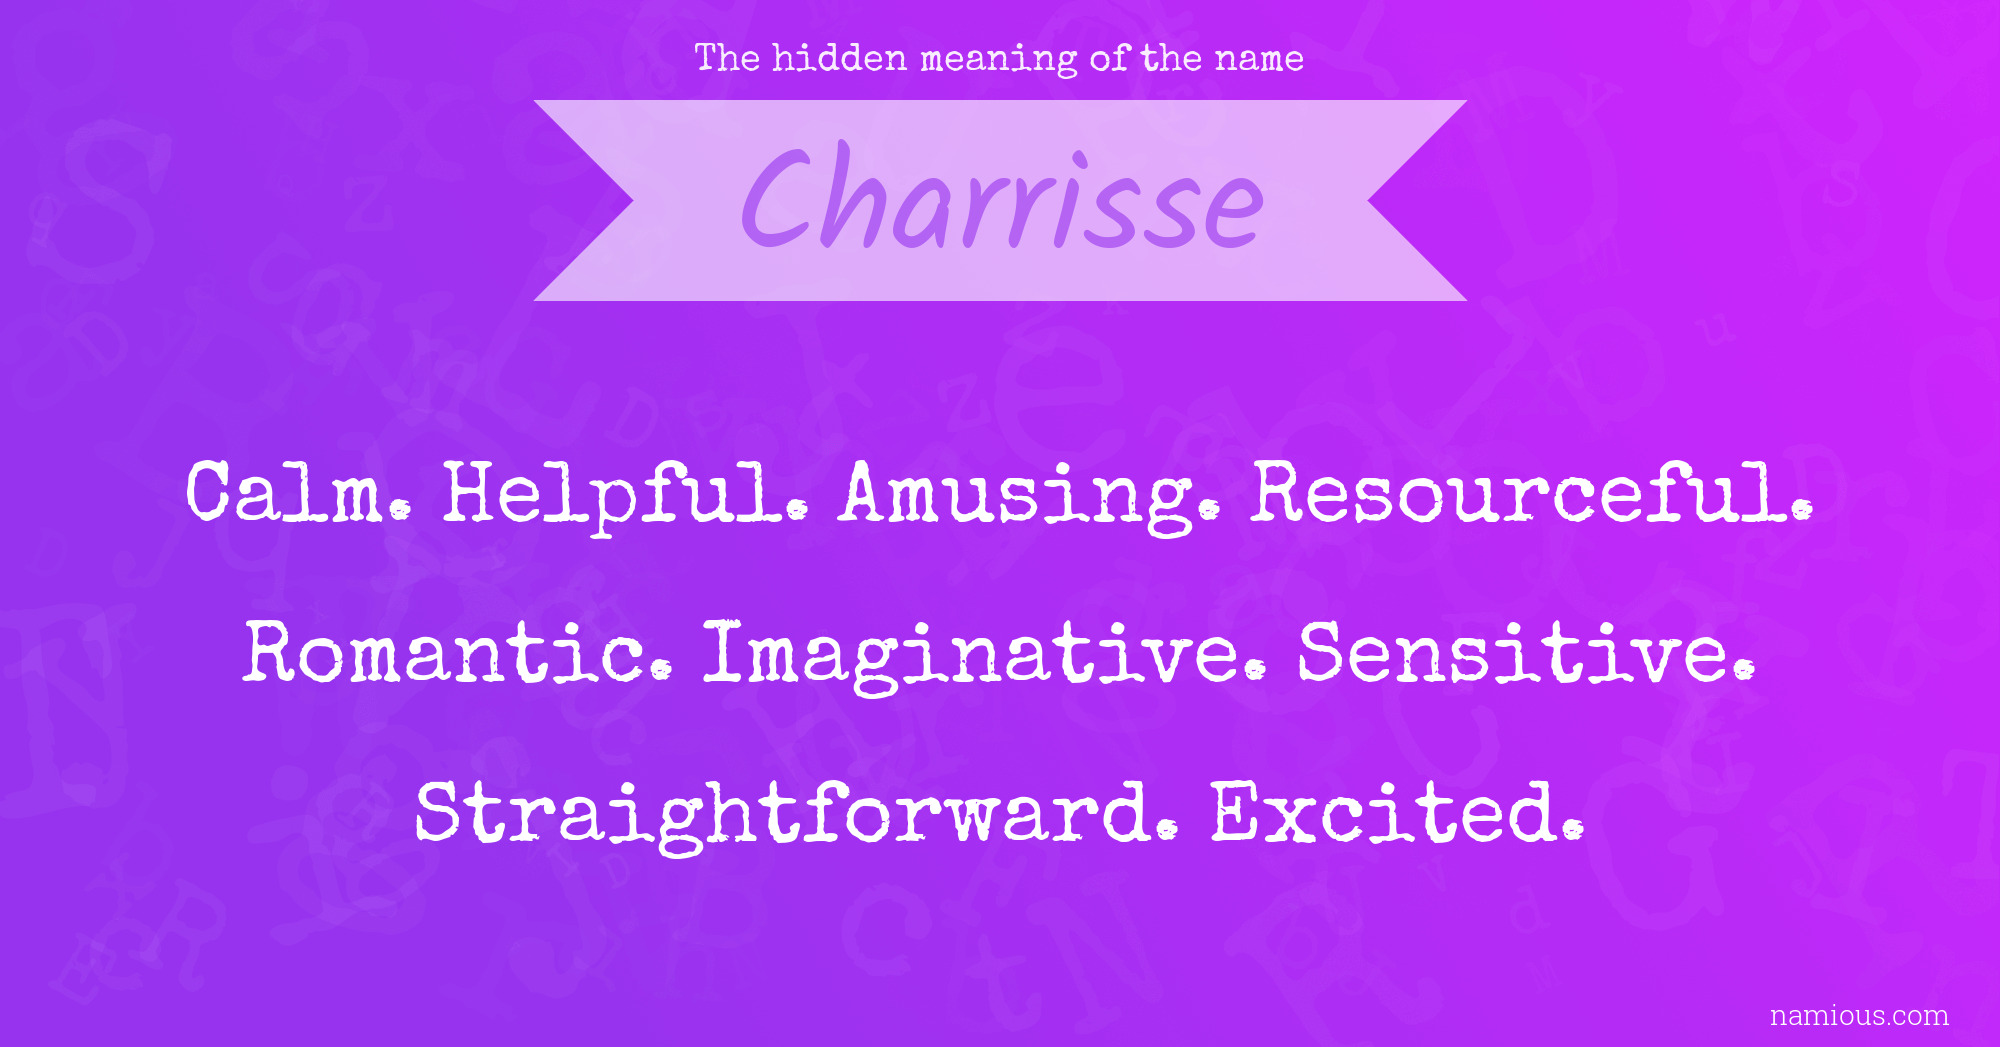 The hidden meaning of the name Charrisse